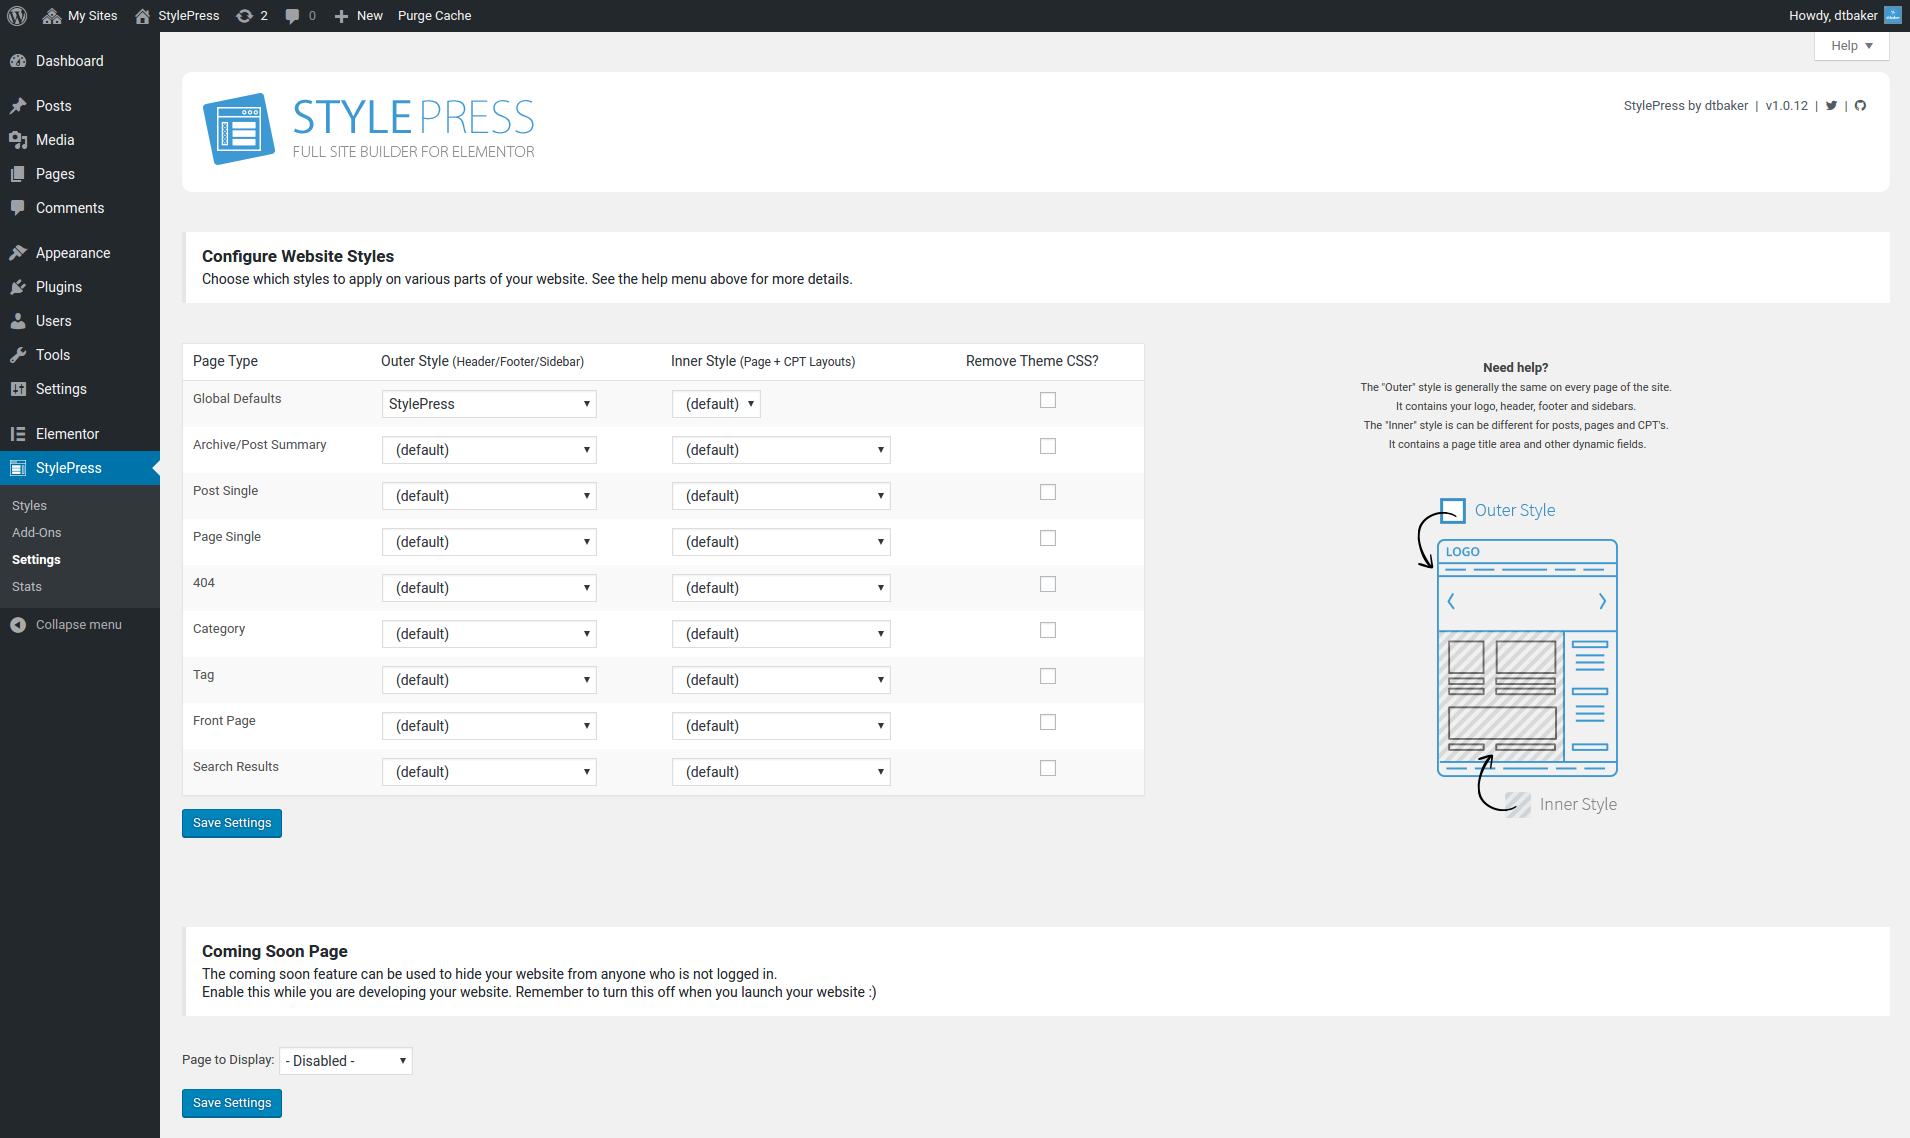 Overview of the settings page. You can set various default styles for various page types.